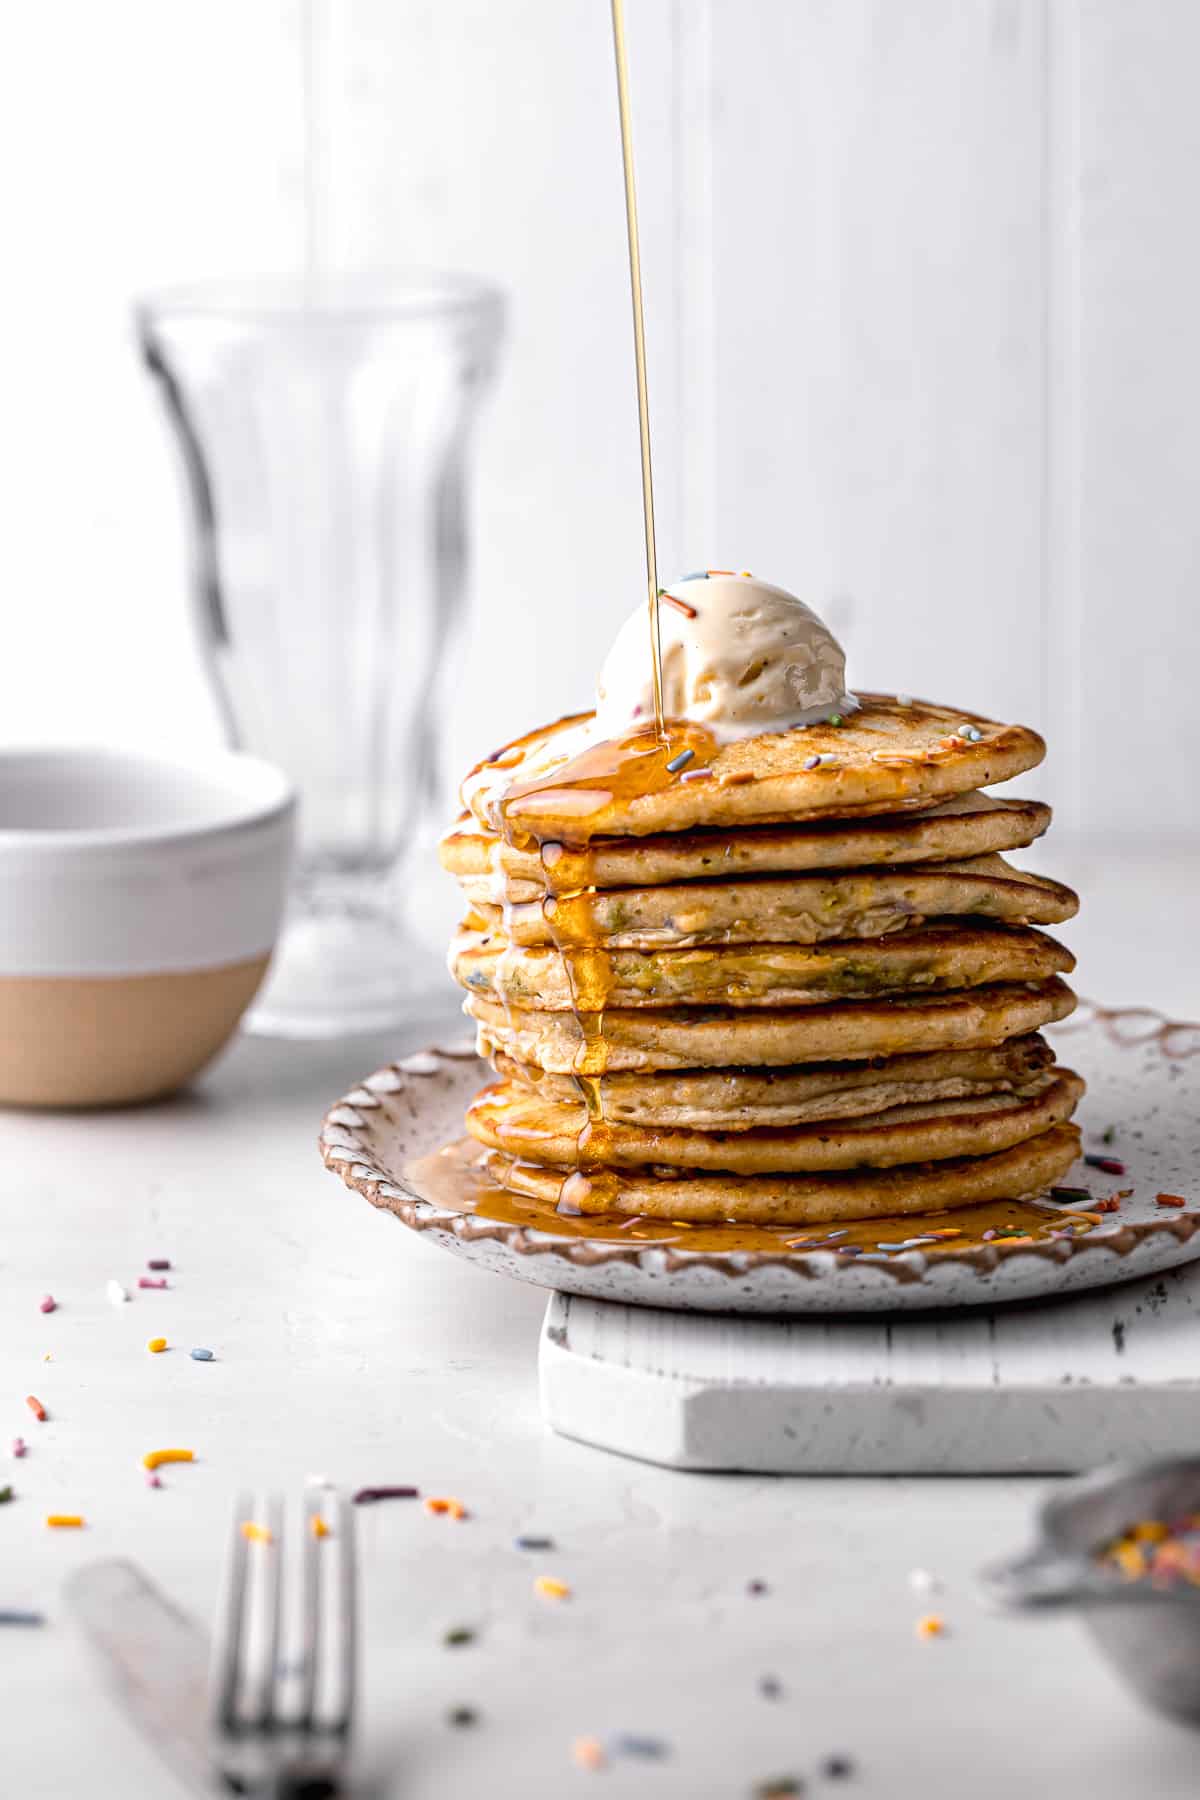 funfetti pancakes topped with ice cream and maple syrup being poured on top.